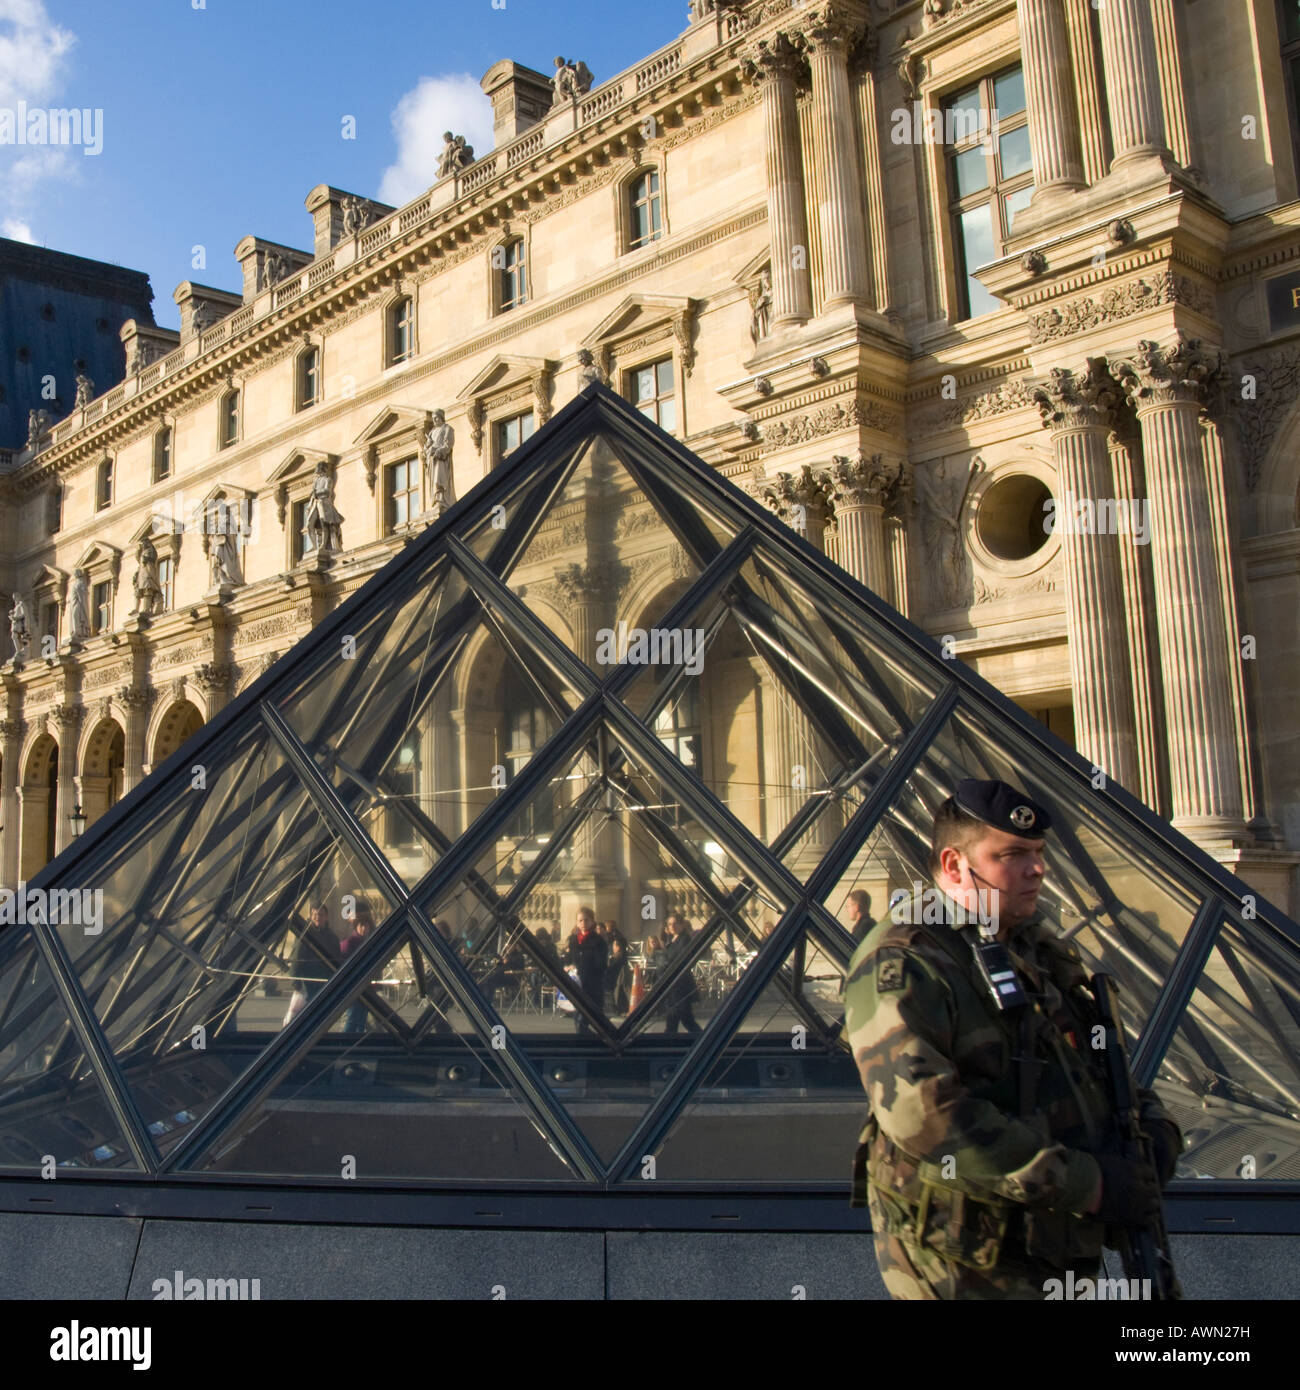 France Paris 1 Le Louvre esplanade small glass pyramide view with armed soldier patroling and facade in bkgd Stock Photo